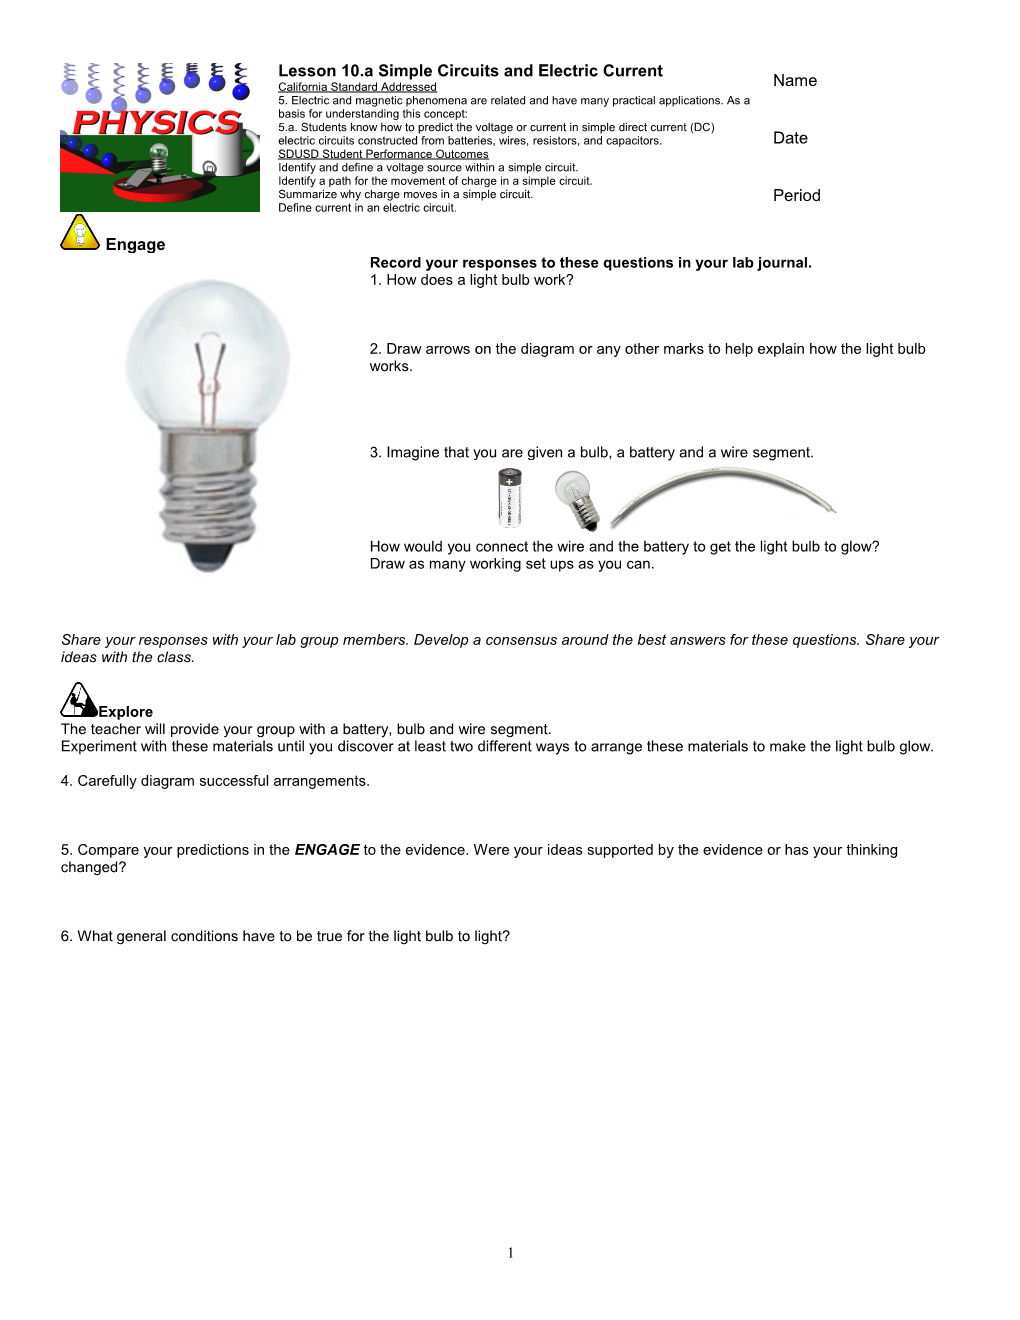 The Teacher Will Provide Your Group with a Battery, Bulb and Wire Segment